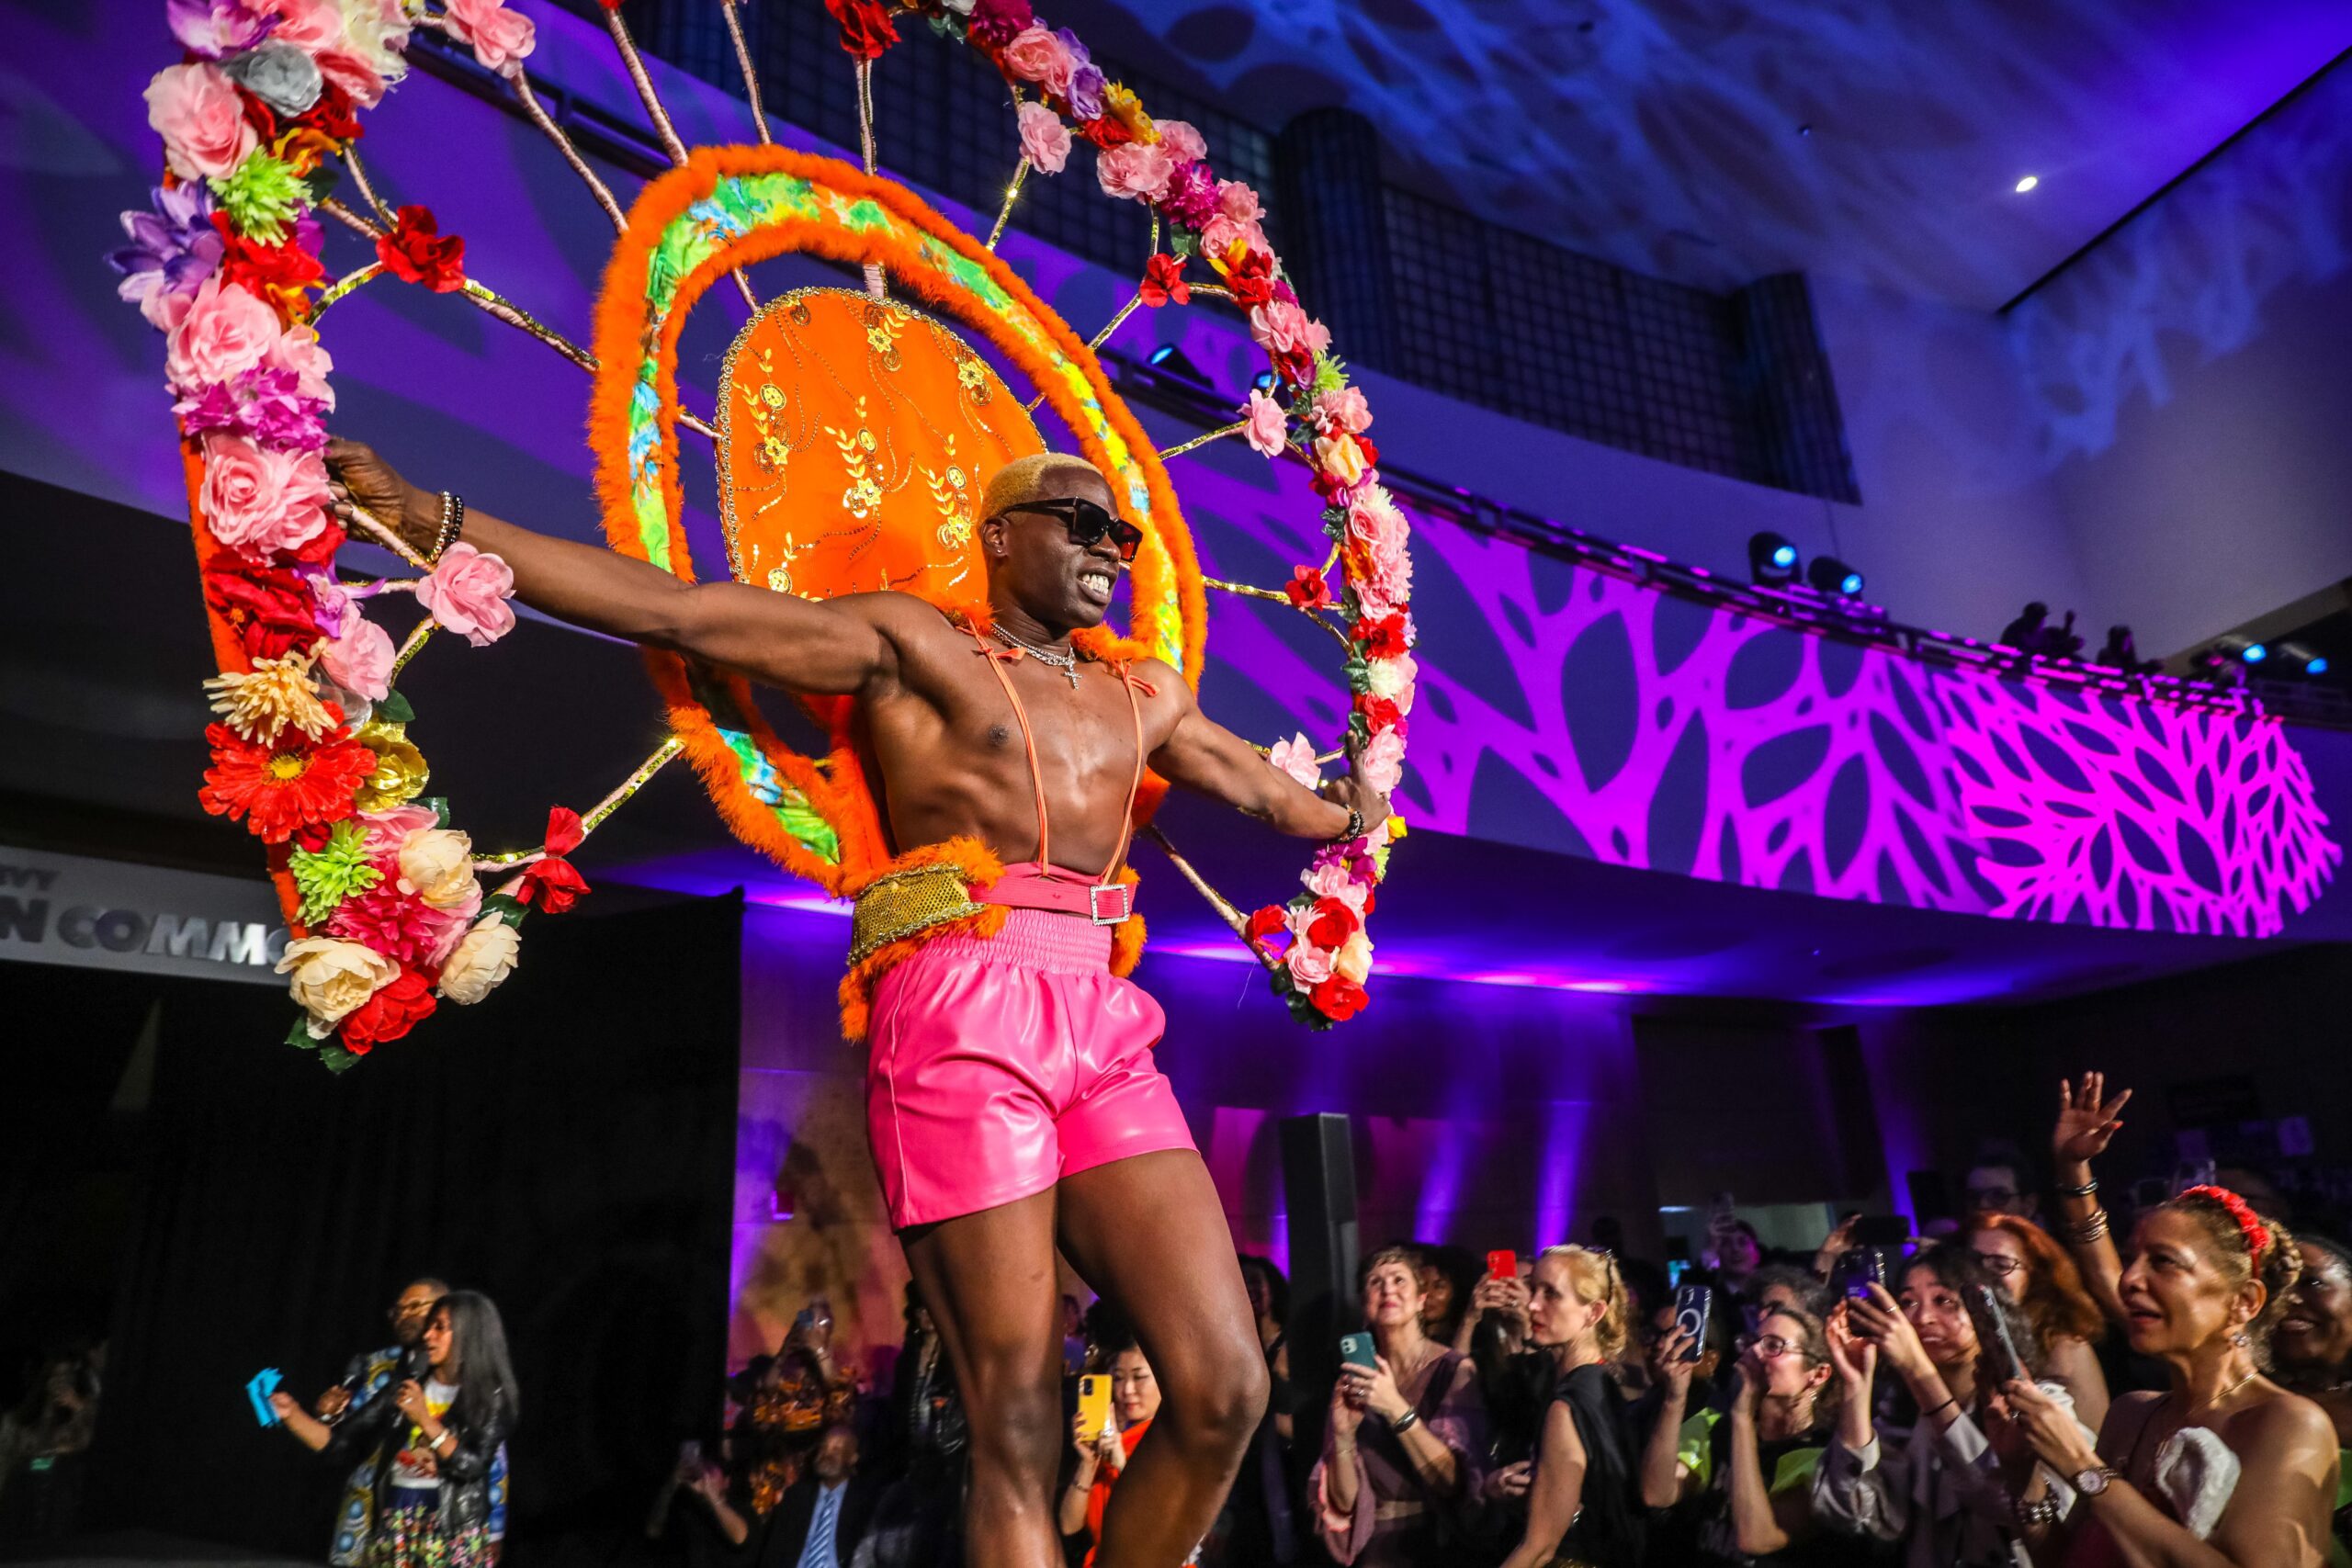 Screw the Met Gala Brooklyn's People's Ball is where it's at